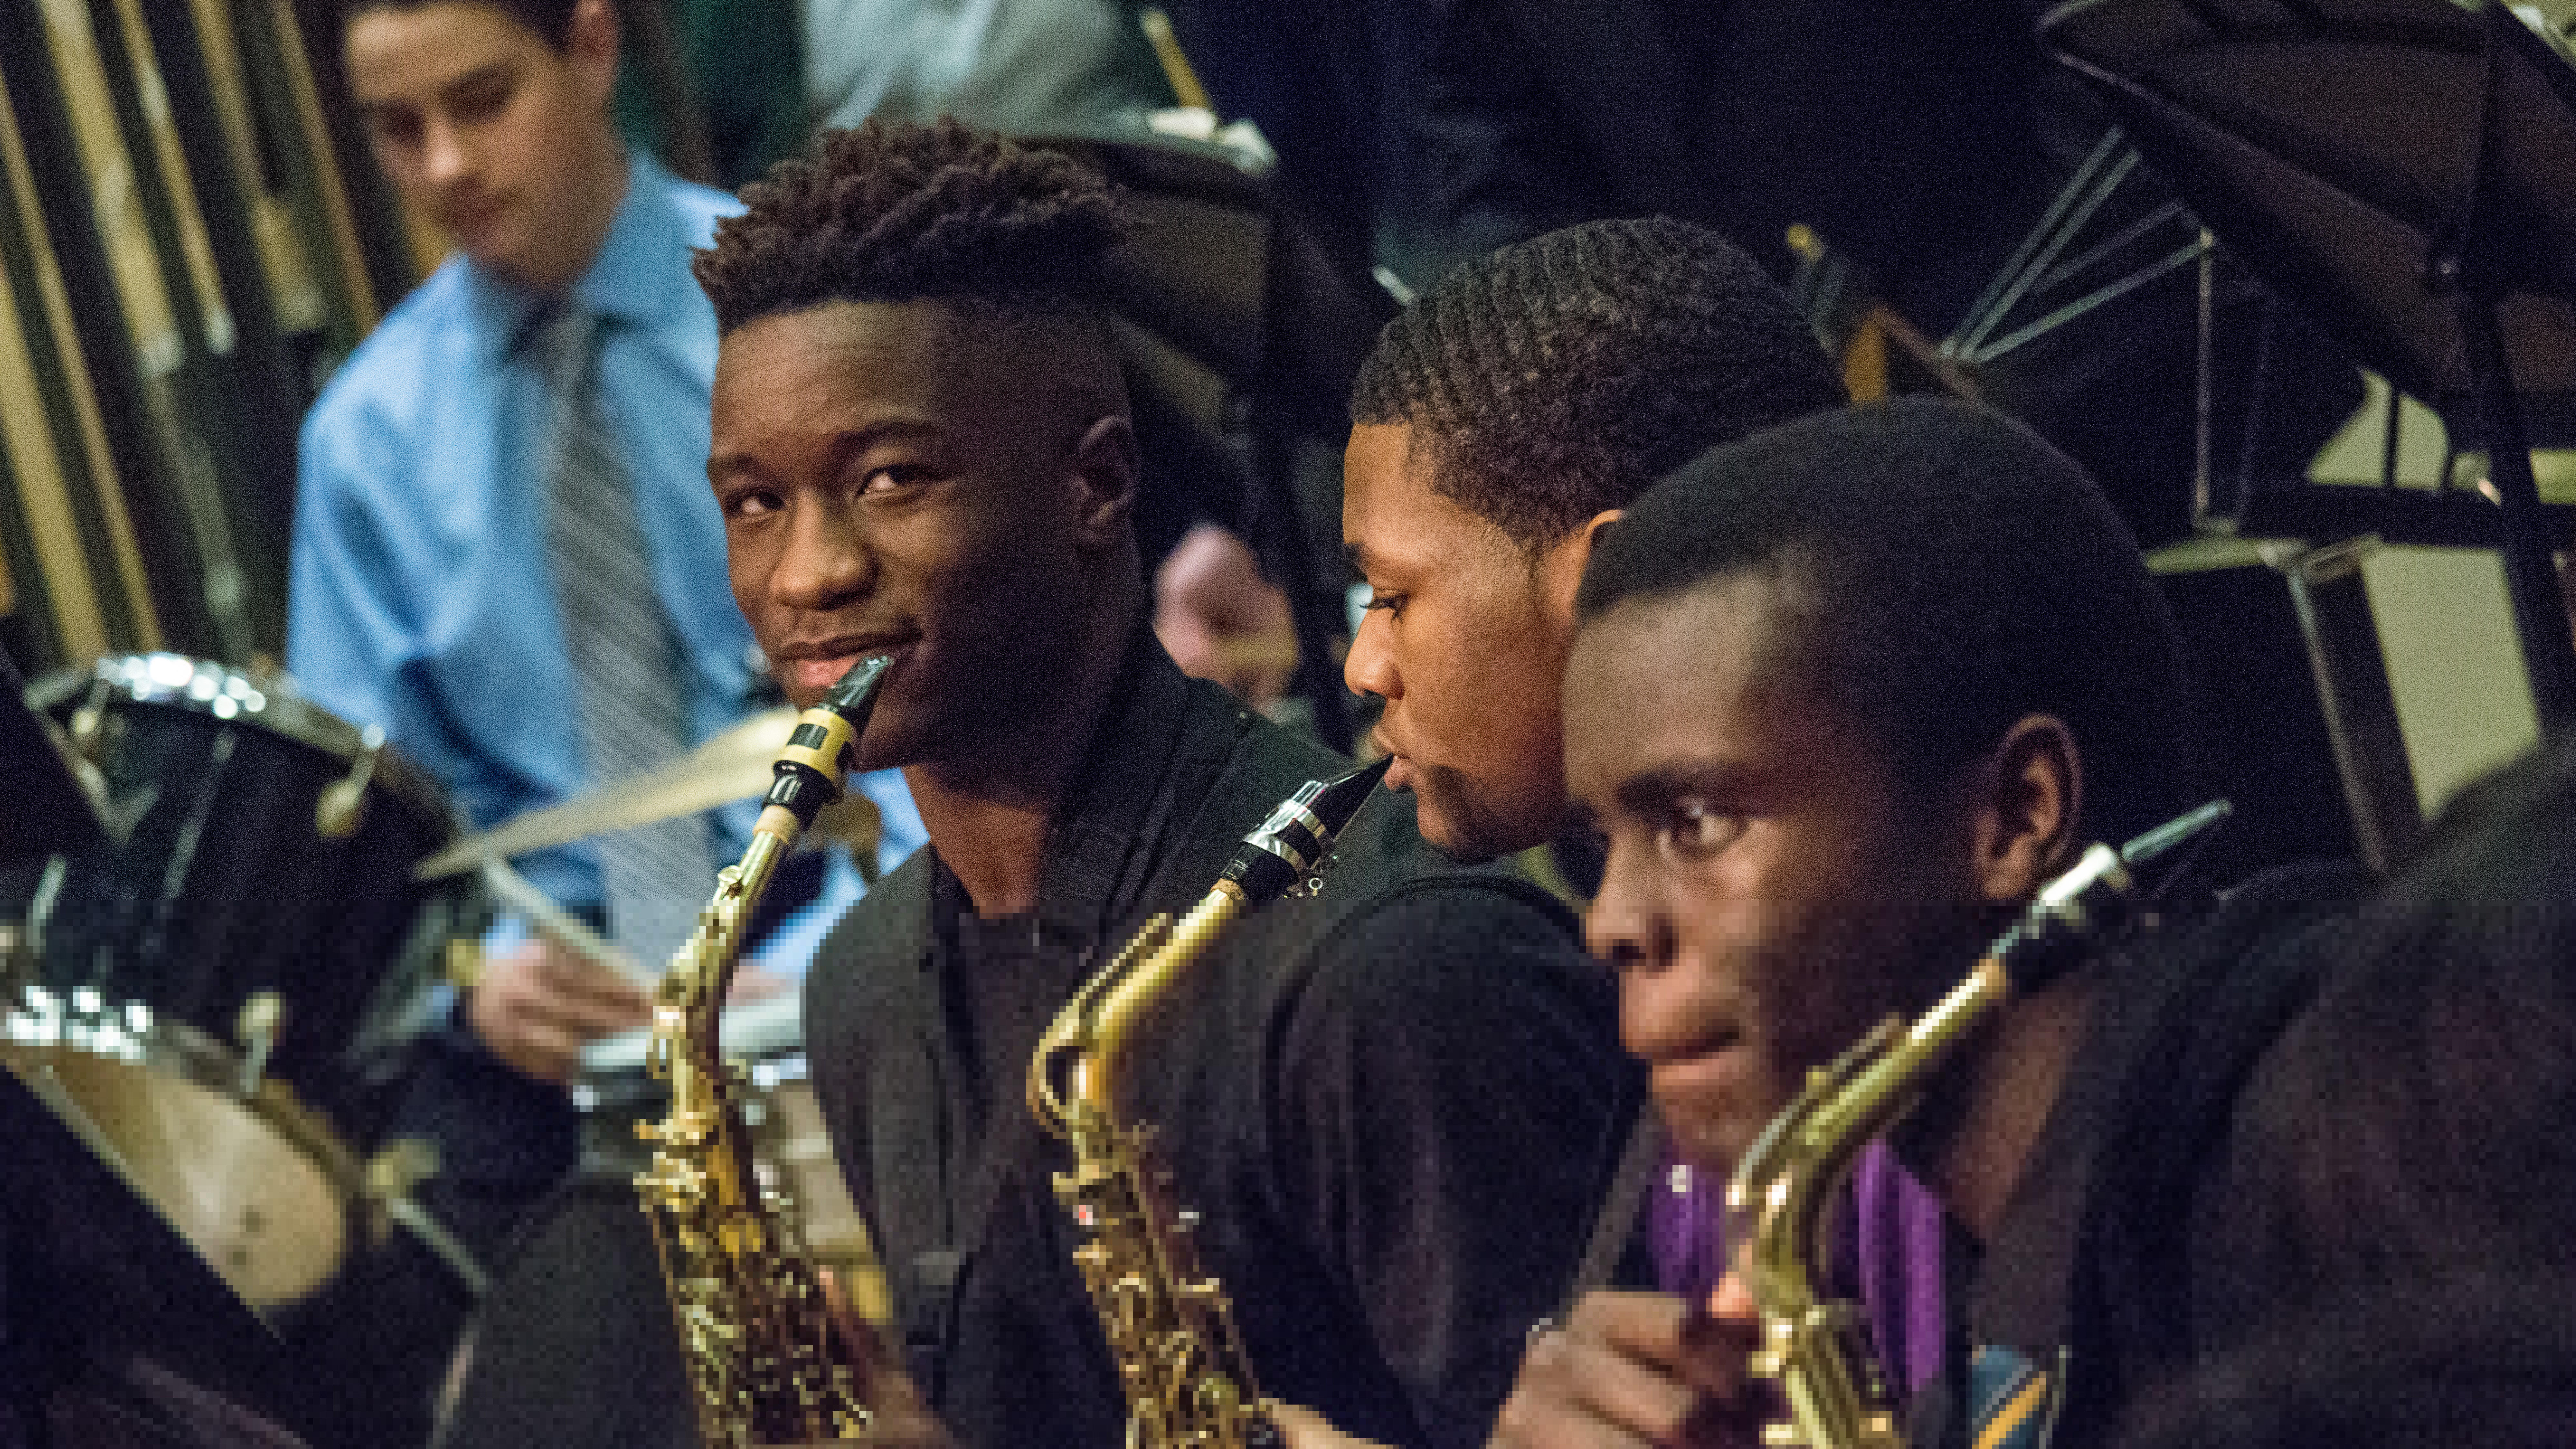 Students playing saxophone during a concert.